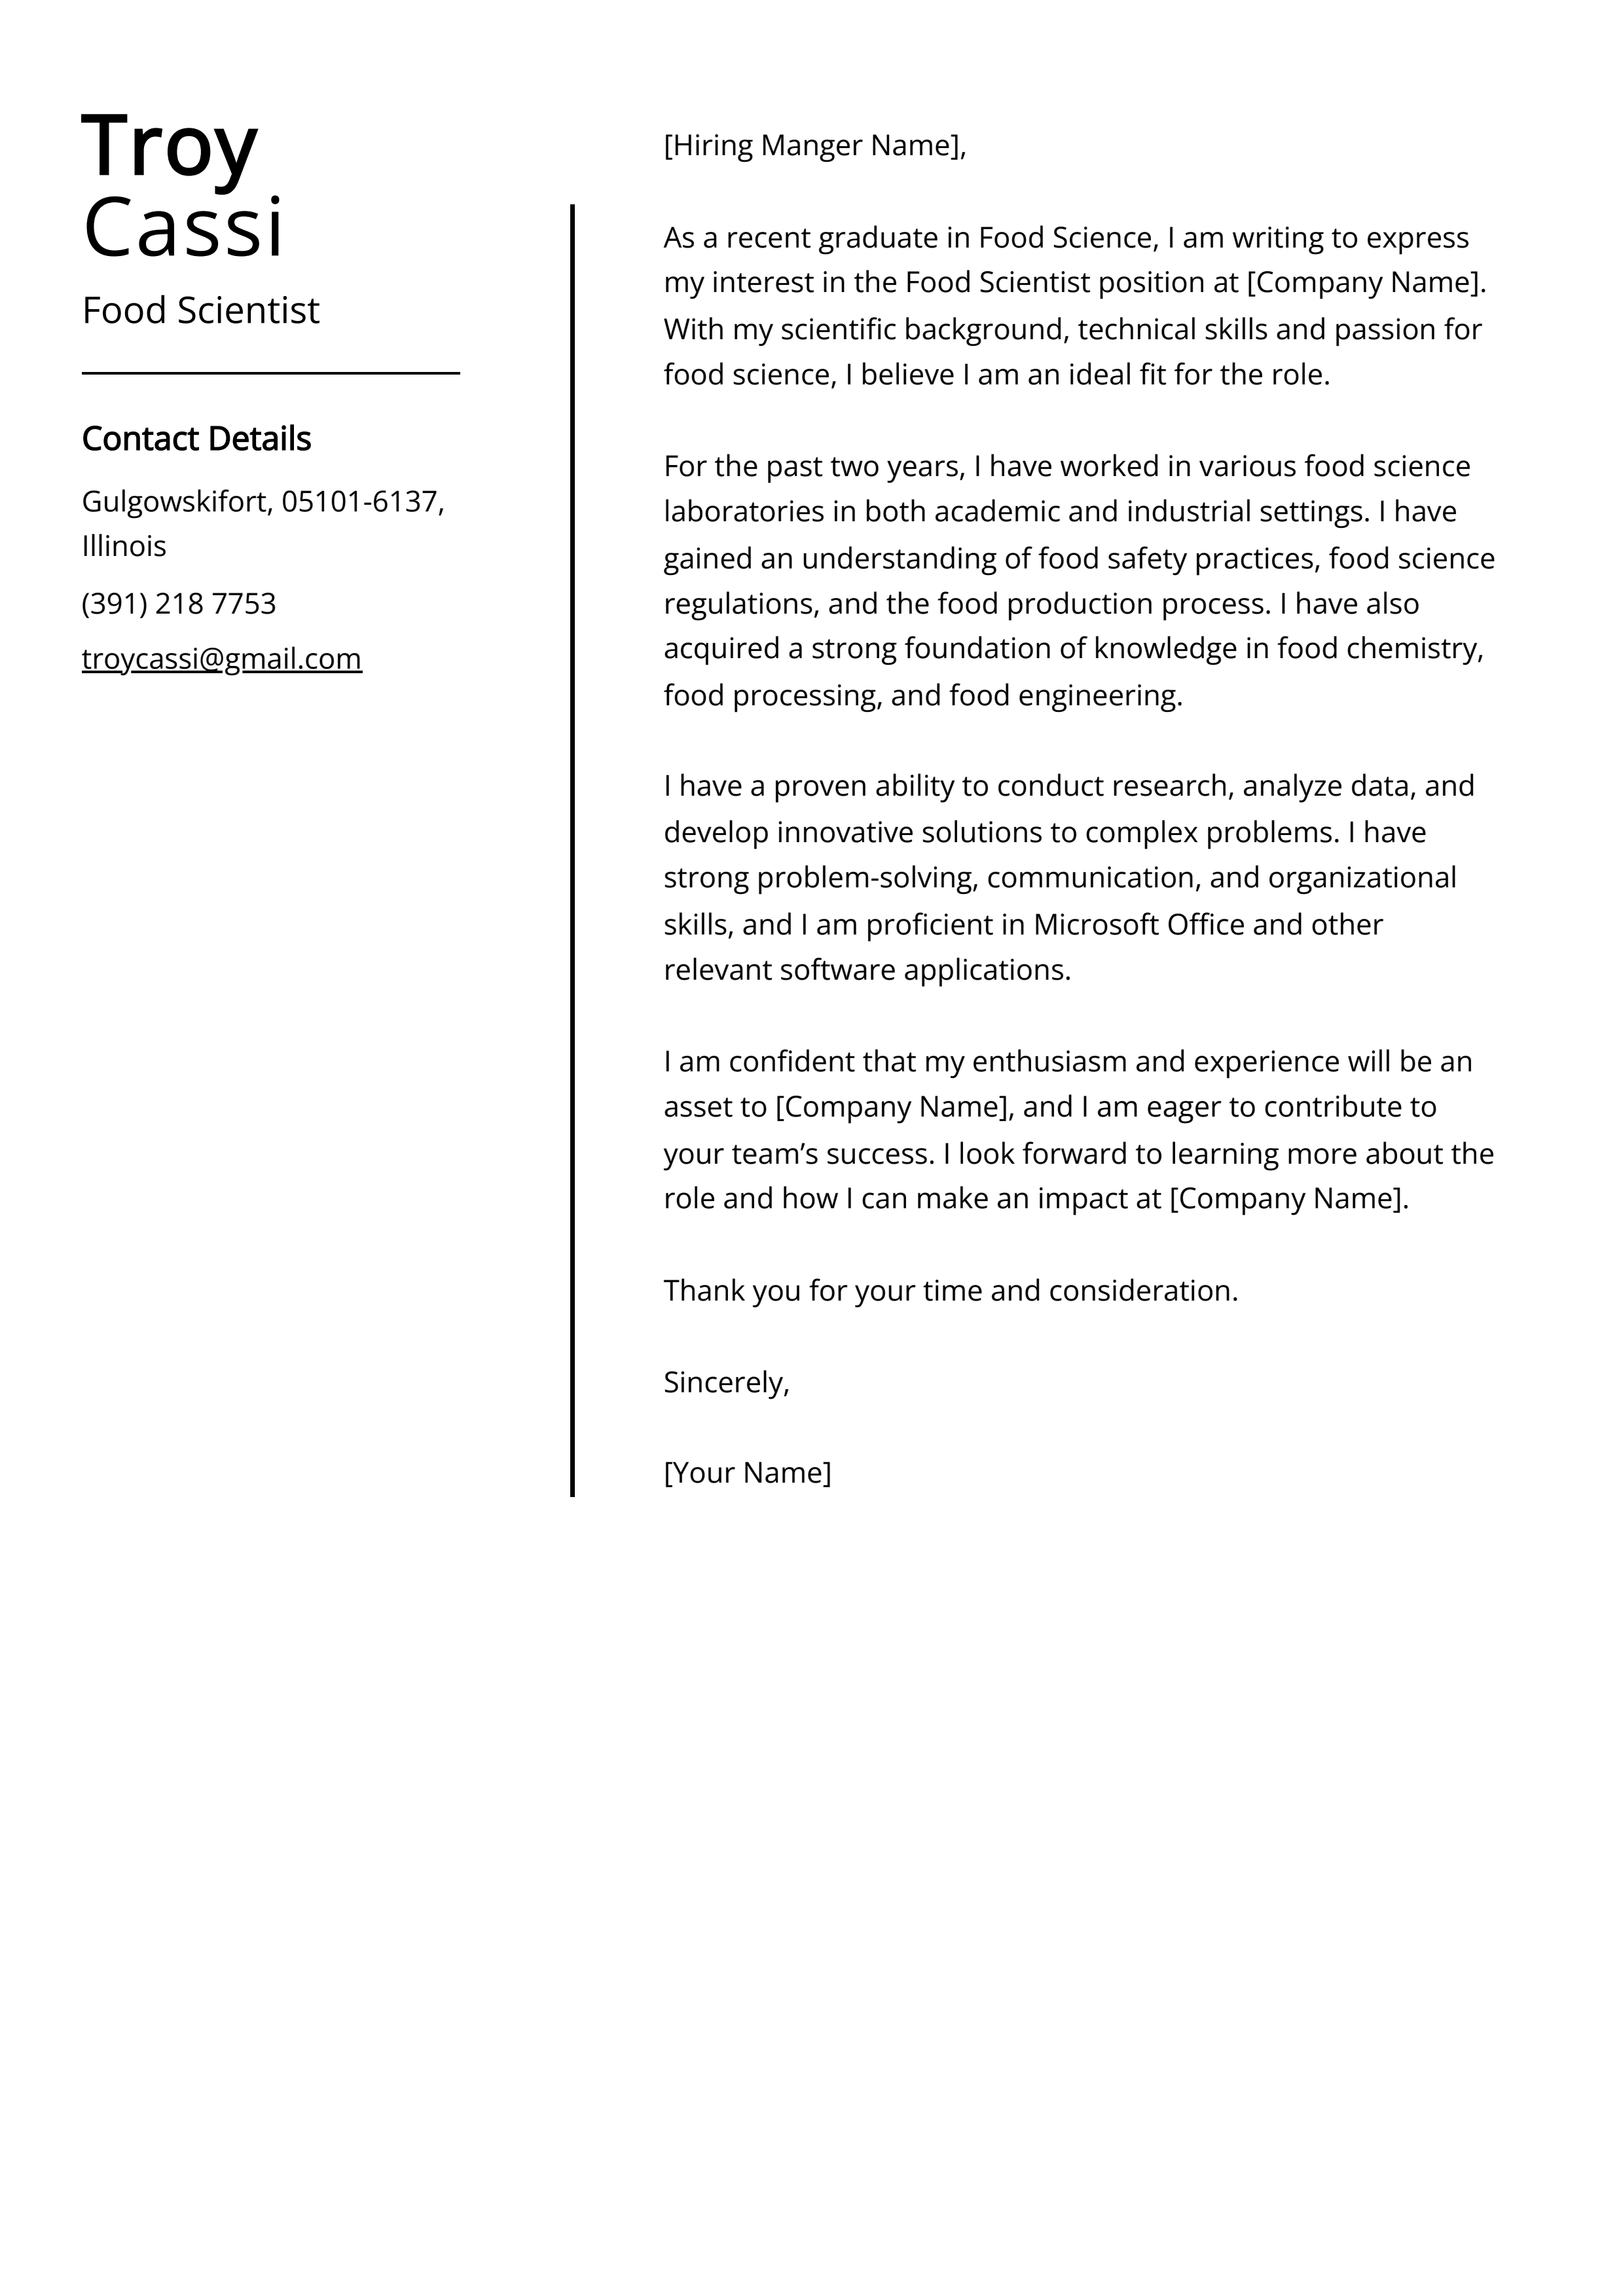 Food Scientist Cover Letter Example